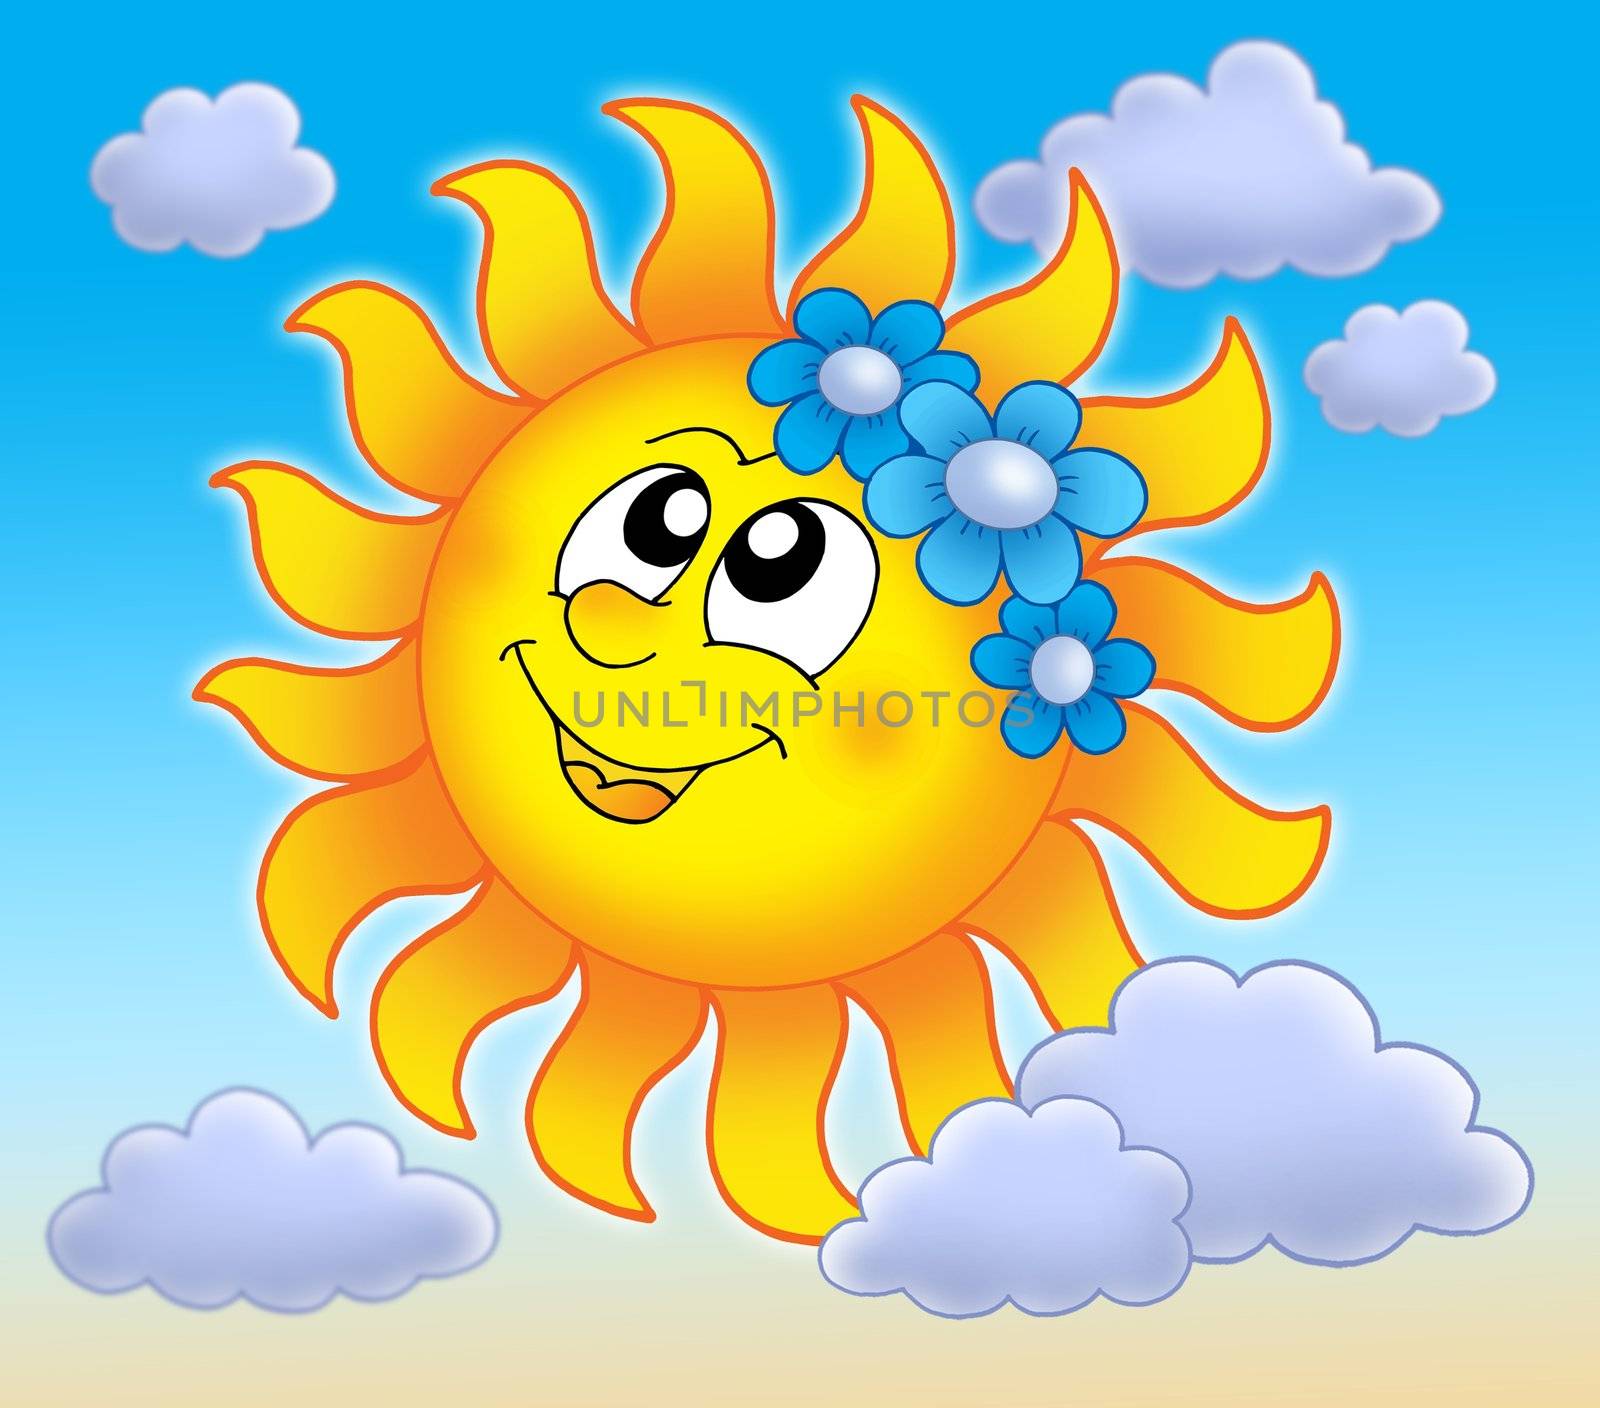 Smiling Sun with flowers on blue sky - color illustration.